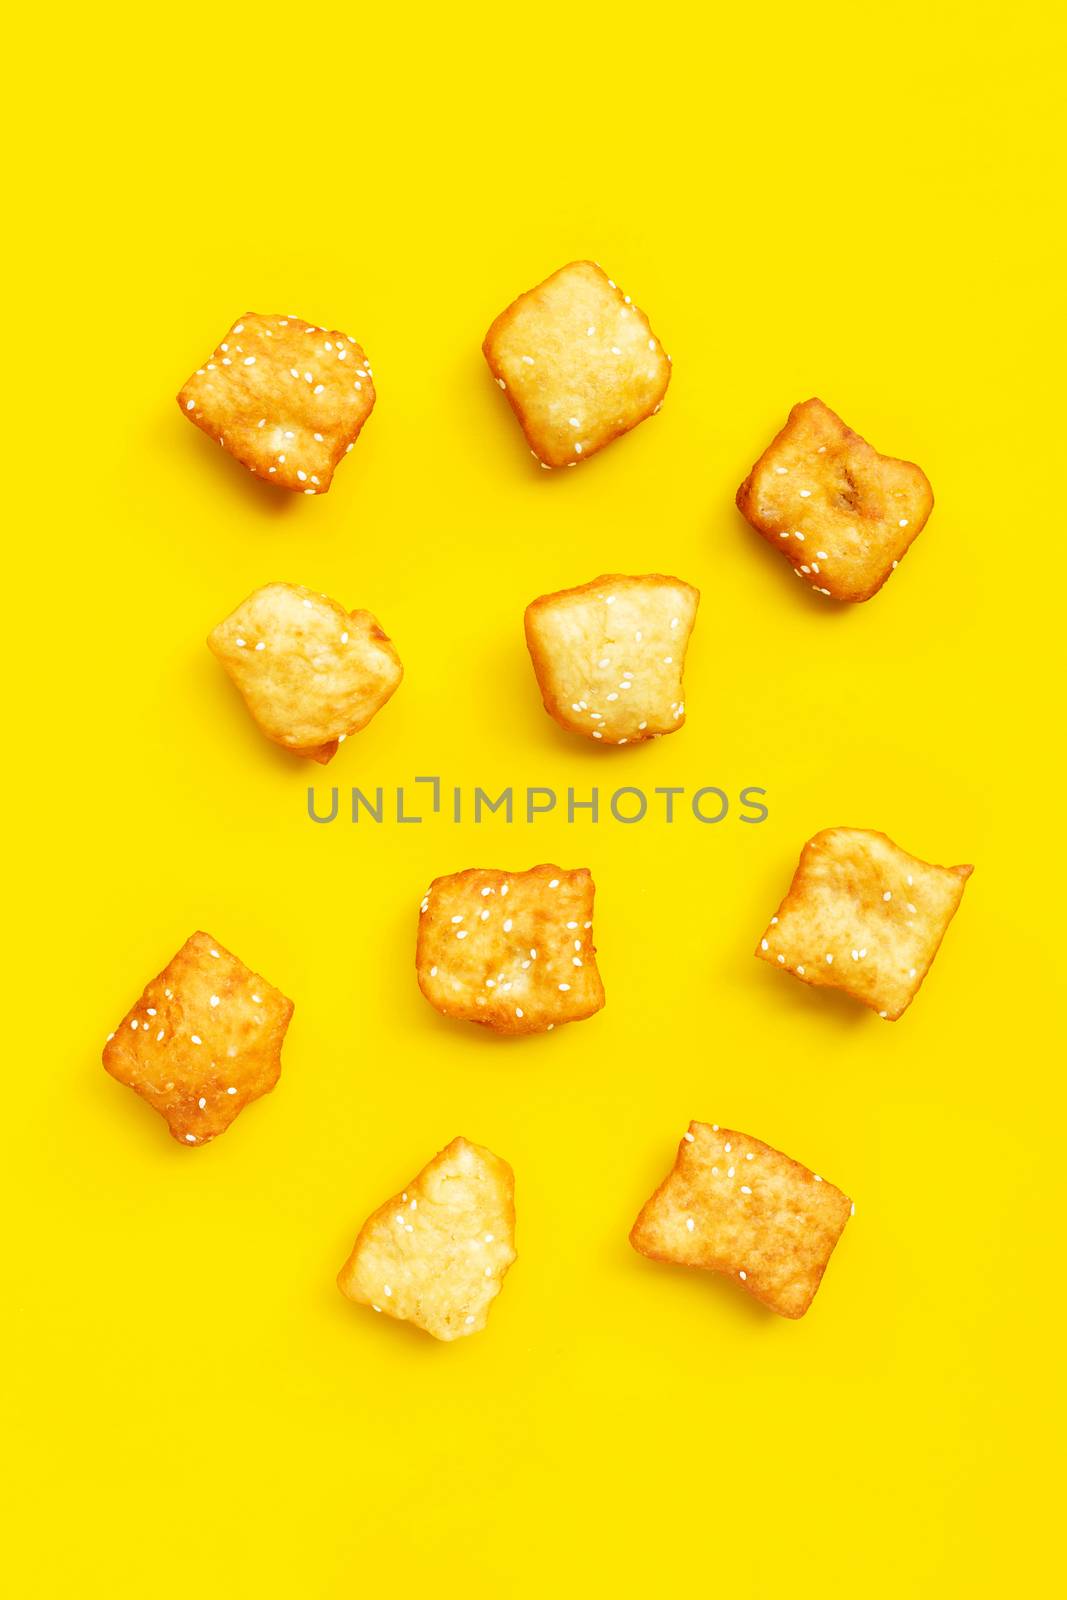 Chinese deep fried dough sticks with white sesame seeds on yellow background.